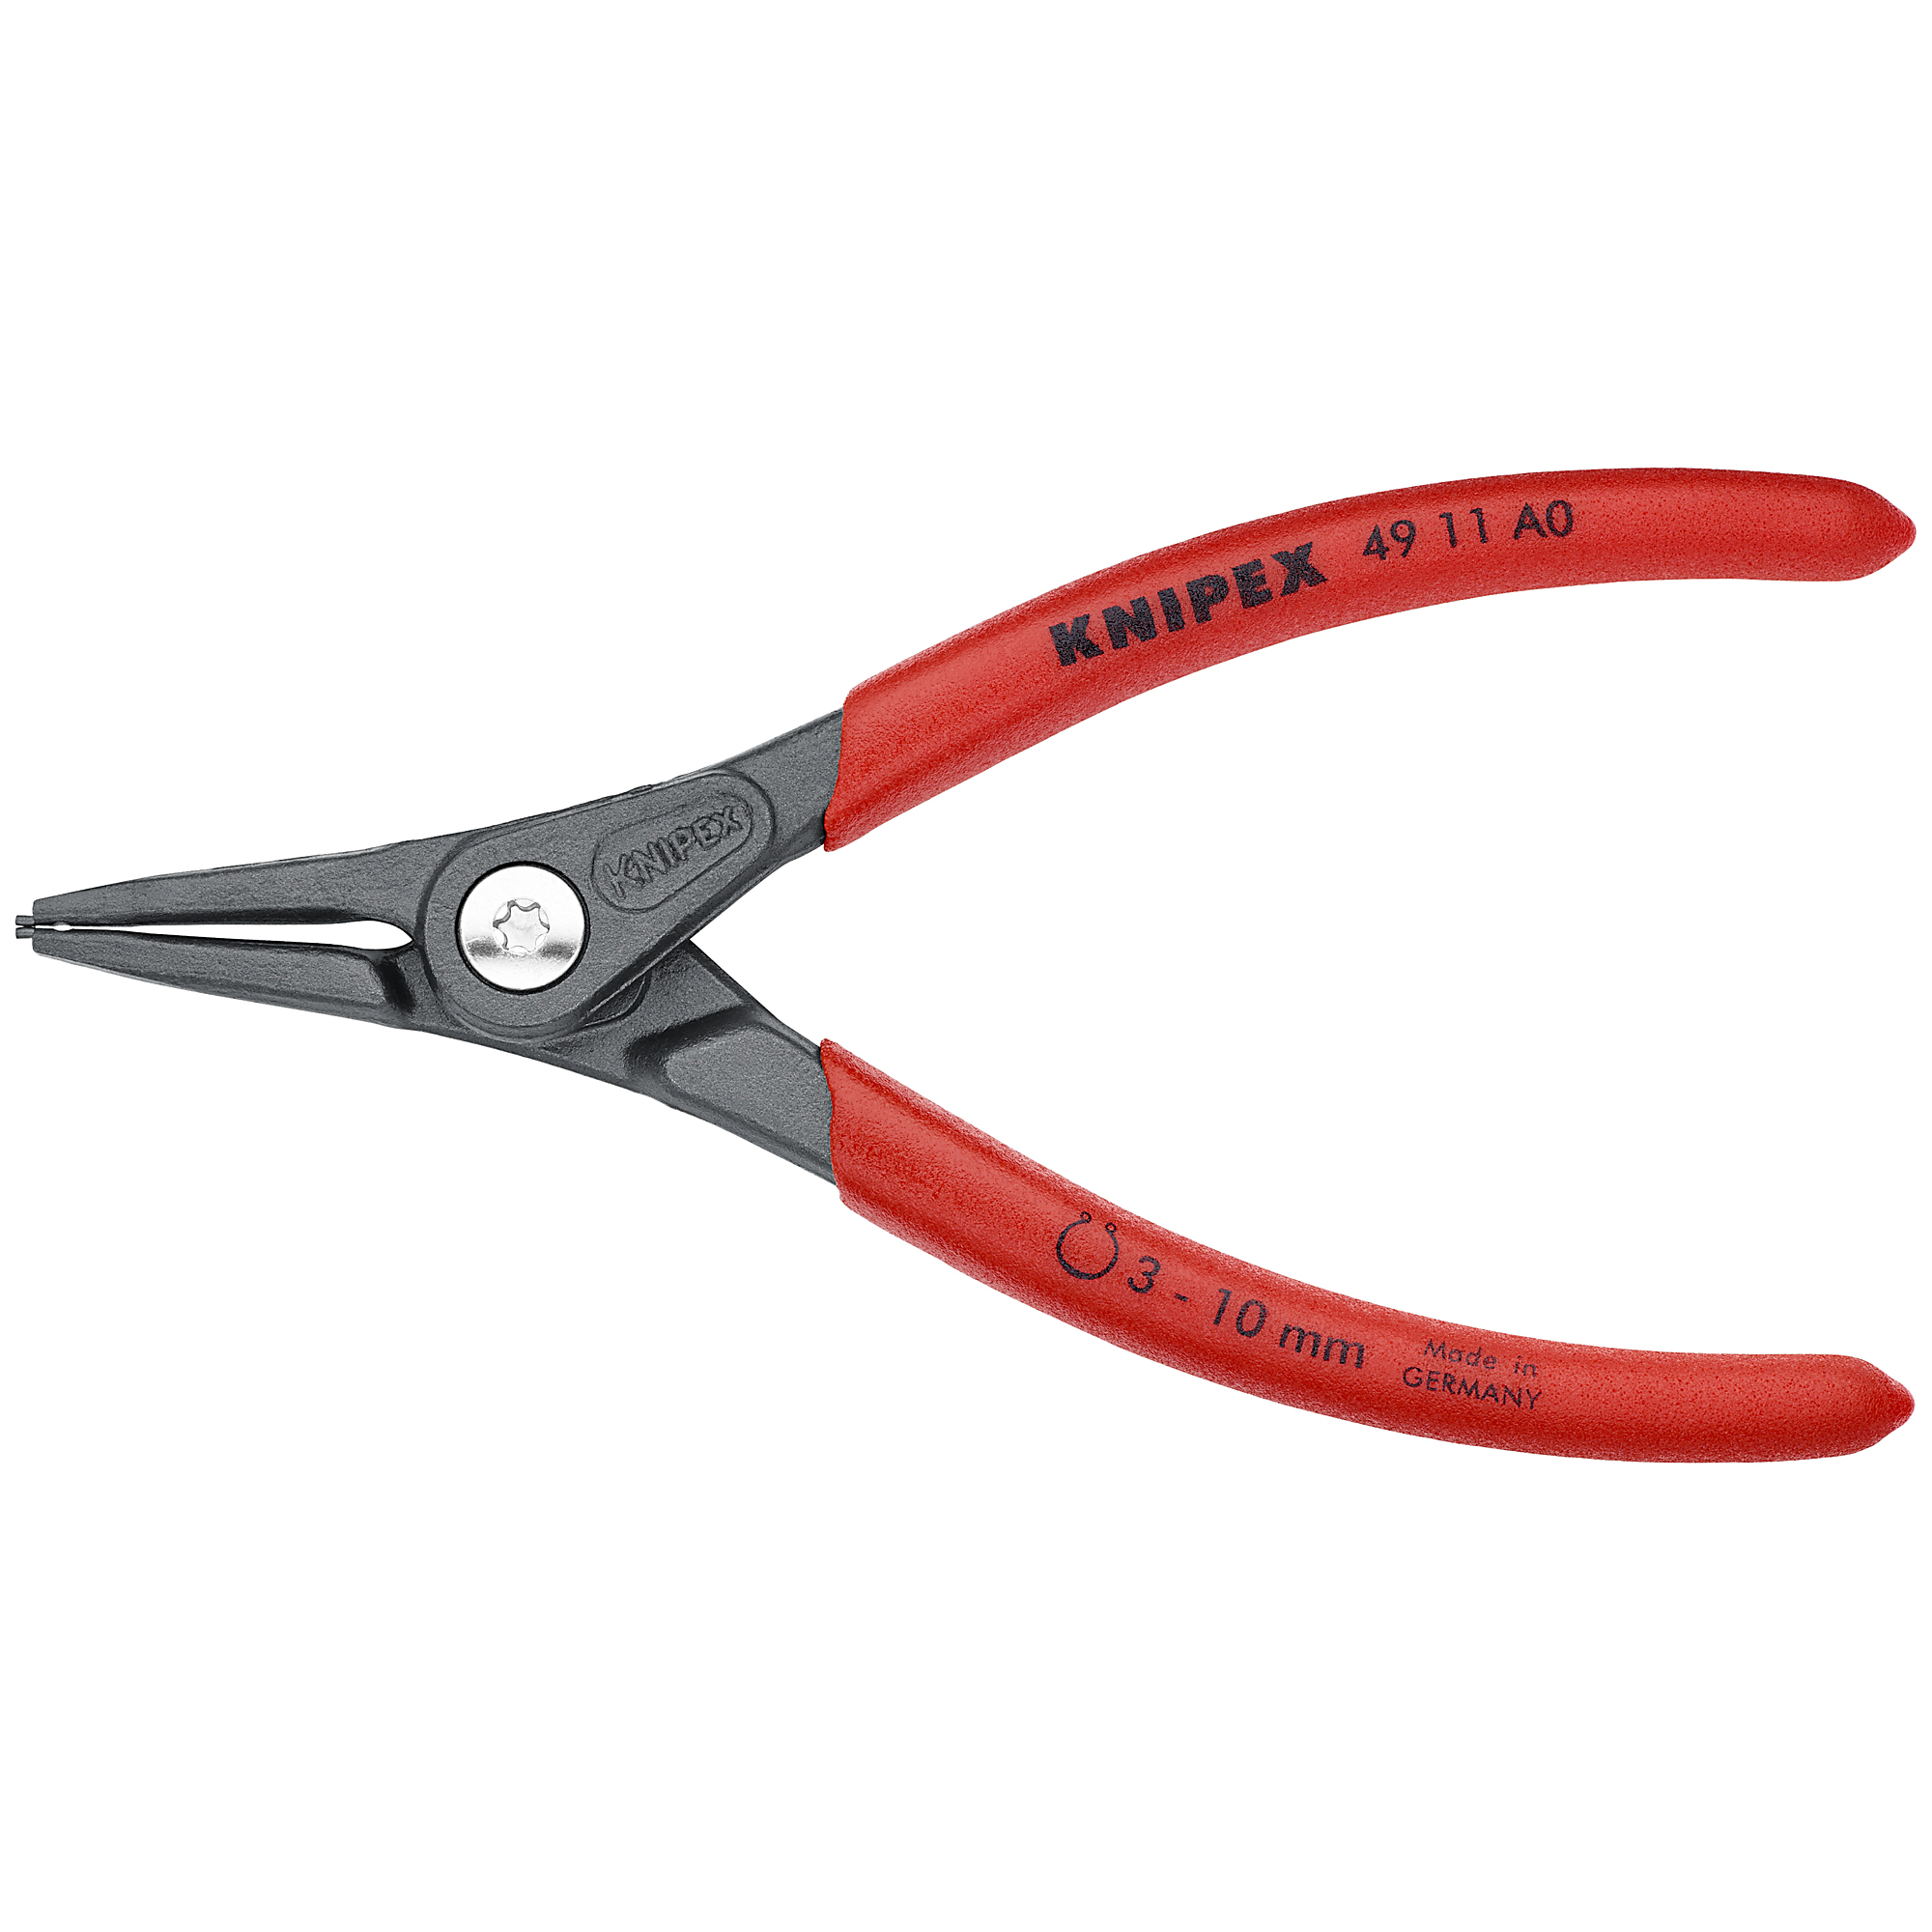 KNIPEX, Ext Precision Snap Ring Pliers, 1/32 tip, 5.50Inch, Pieces (qty.) 1 Material Steel, Model 49 11 A0